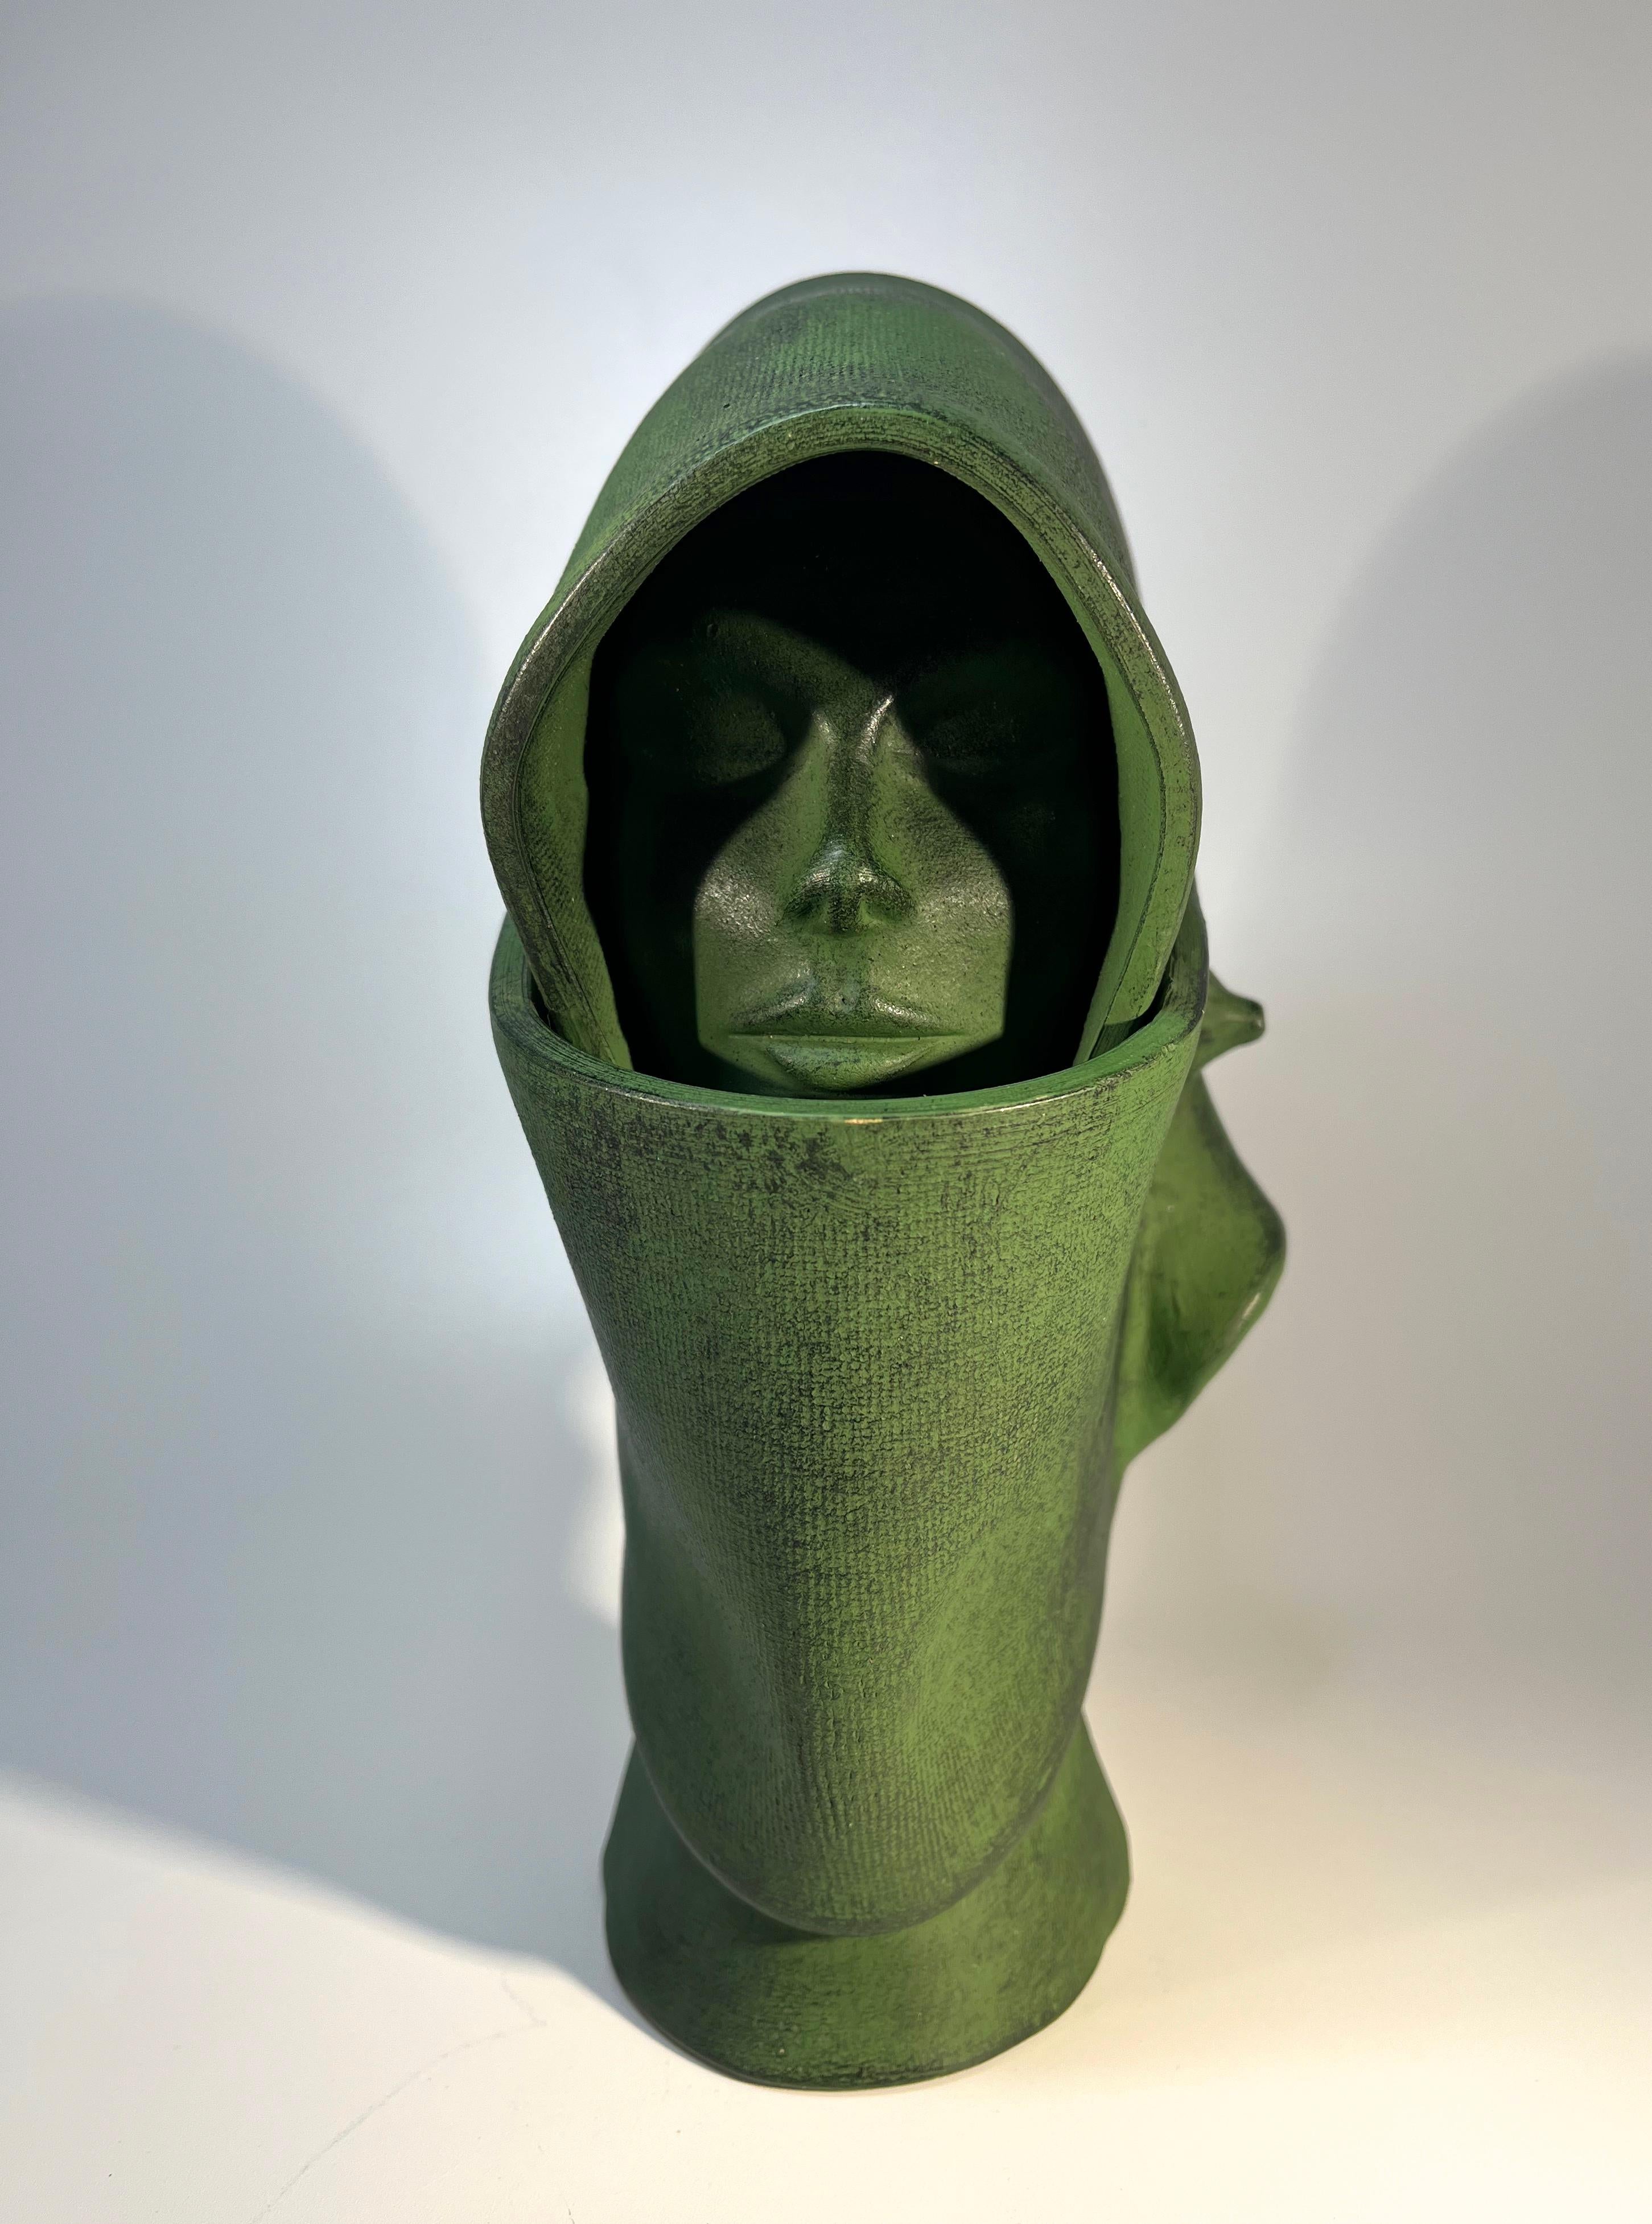 A private, calming and quiet piece by an unknown artist
Beautifully crafted and subtly finished with dark green matt glaze
Circa 1980s
Unsigned
Height 9.5 inch, Width 5 inch, Depth 4.5 inch
In very good condition
Wear consistent with age and use